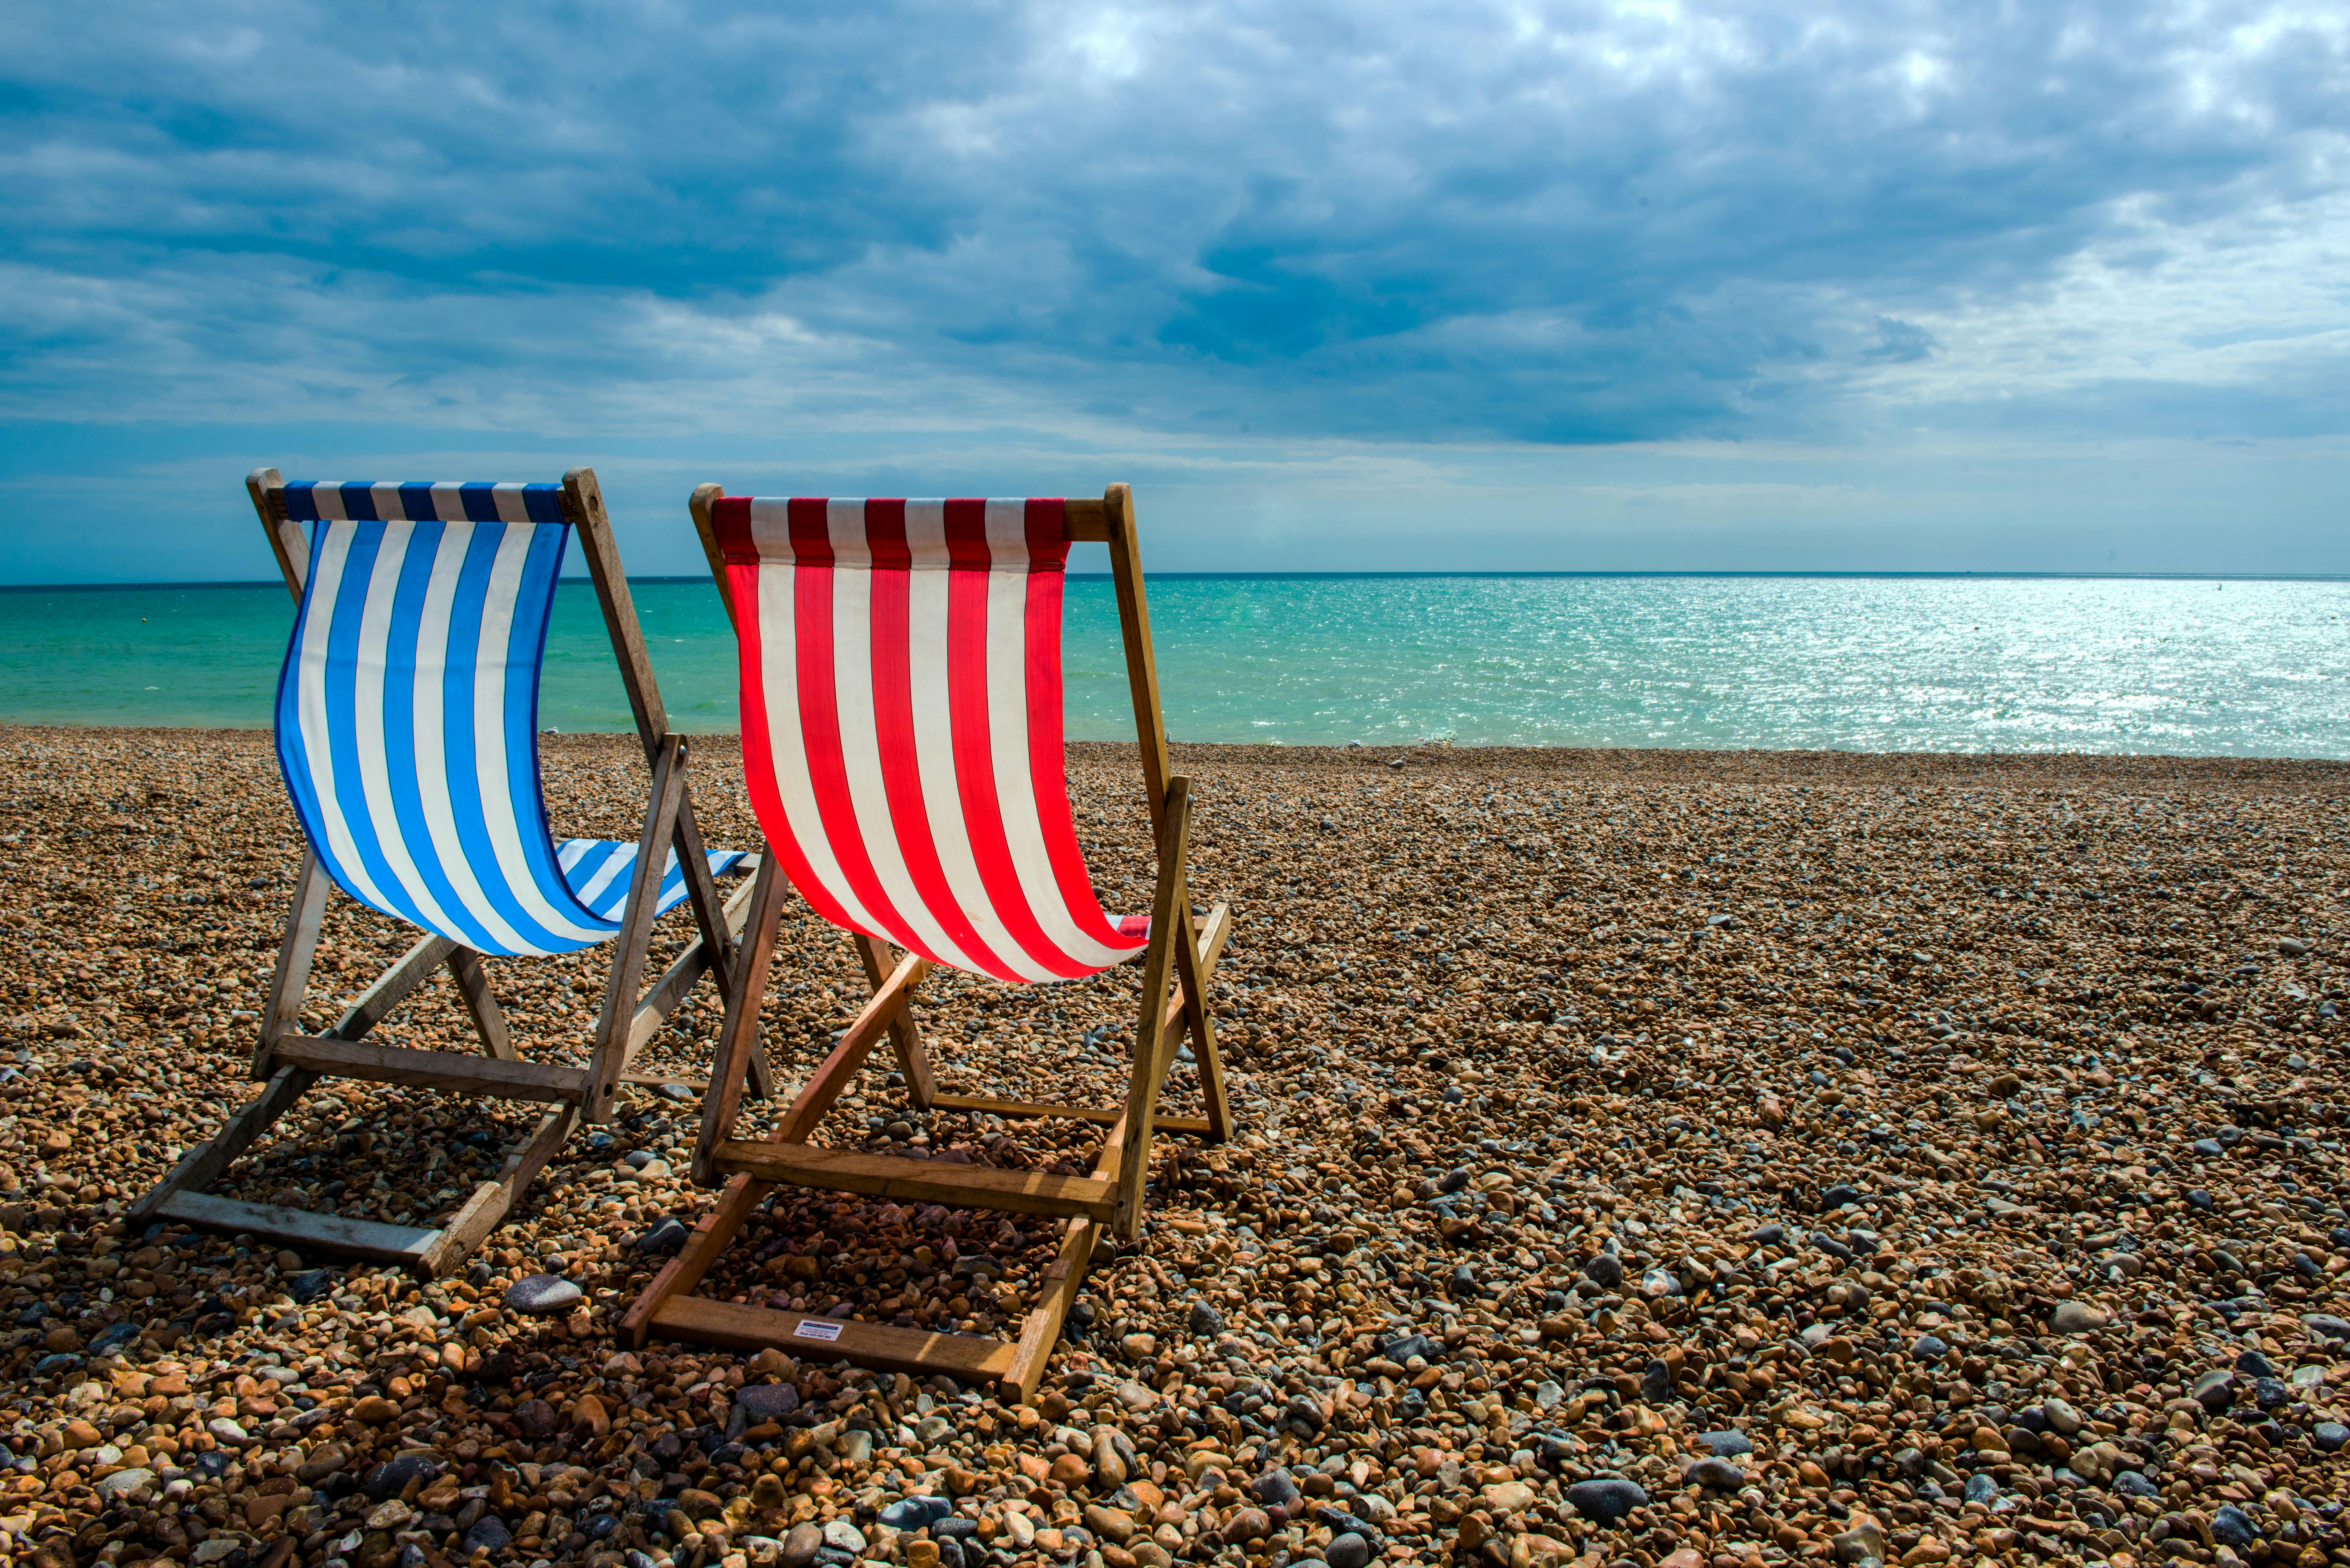 Two empty deck chairs, one with red and white stripes, the other with blue and white stripes, are arranged to look out towards the sea on Brighton beach. The fabric is billowing in the wind.